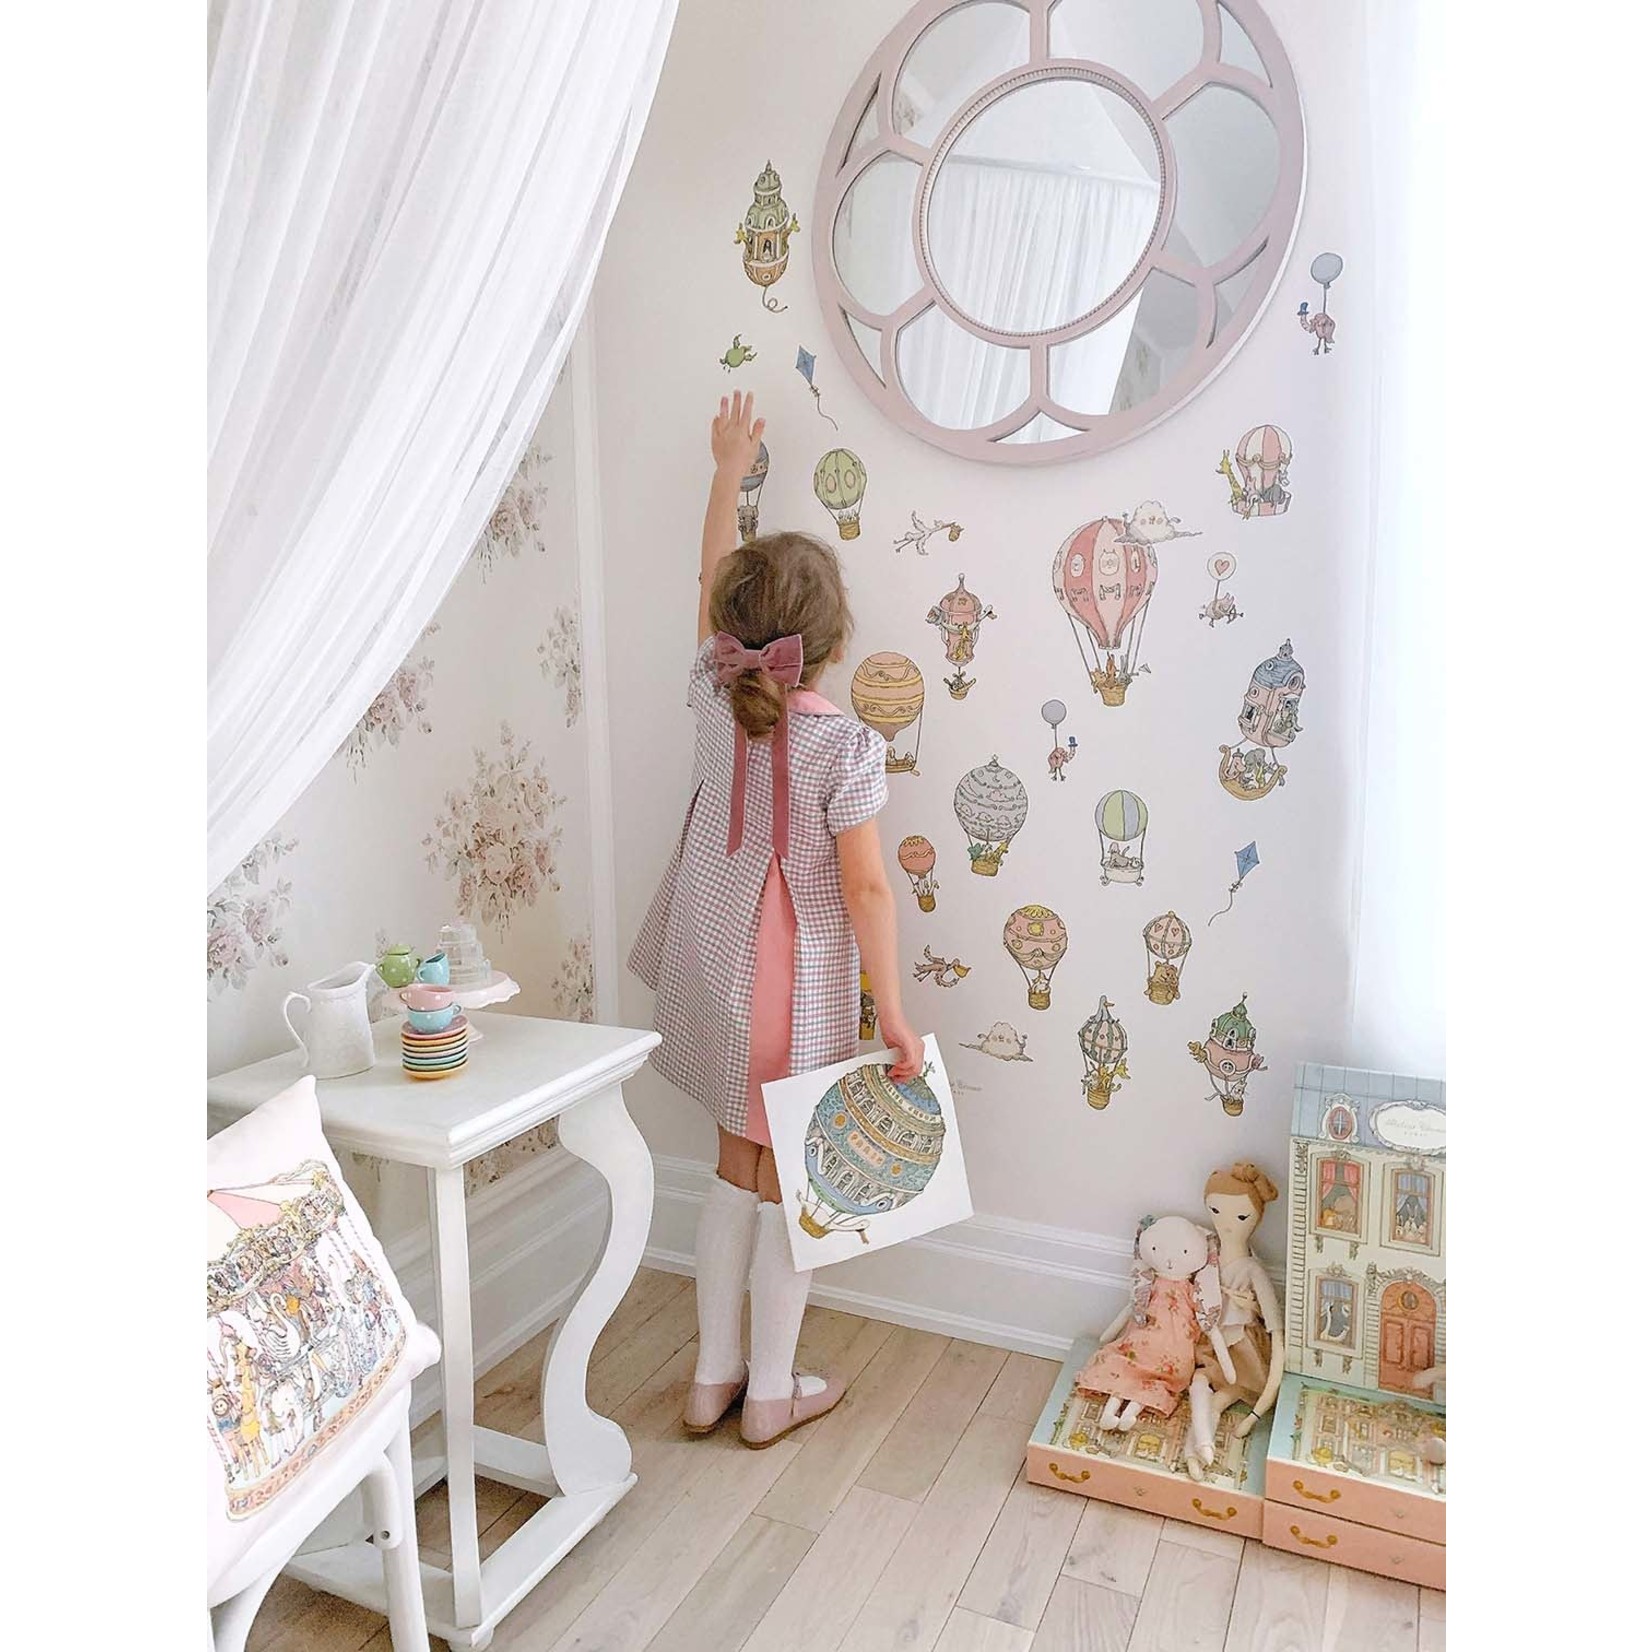 Atelier Choux Atelier Choux - easy-stick, removable wall stickers